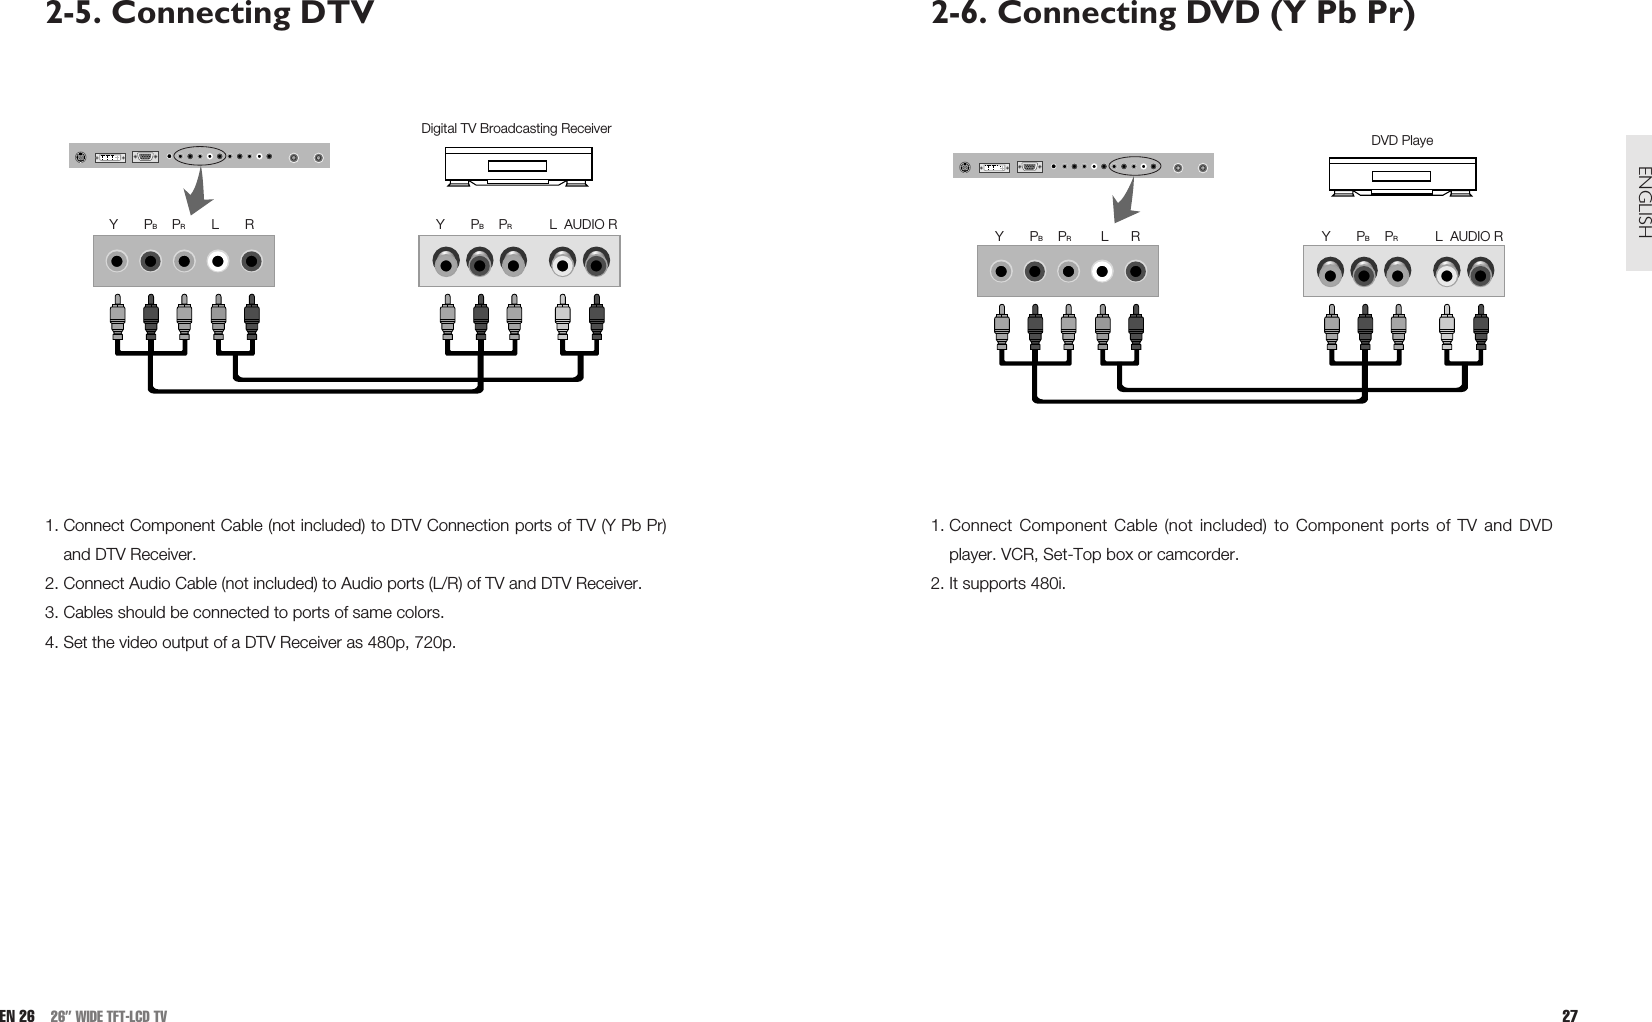 2-6. Connecting DVD (Y Pb Pr)1. Connect Component Cable (not included) to Component ports of TV and DVDplayer. VCR, Set-Top box or camcorder.2. It supports 480i.27ENGLISHDVD PlayeY       PBPRL  AUDIO RY       PBPRL      R2-5. Connecting DTV1. Connect Component Cable (not included) to DTV Connection ports of TV (Y Pb Pr)and DTV Receiver. 2. Connect Audio Cable (not included) to Audio ports (L/R) of TV and DTV Receiver. 3. Cables should be connected to ports of same colors.4. Set the video output of a DTV Receiver as 480p, 720p.EN 26 26” WIDE TFT-LCD TVDigital TV Broadcasting ReceiverY       PBPRL  AUDIO RY       PBPRL       R